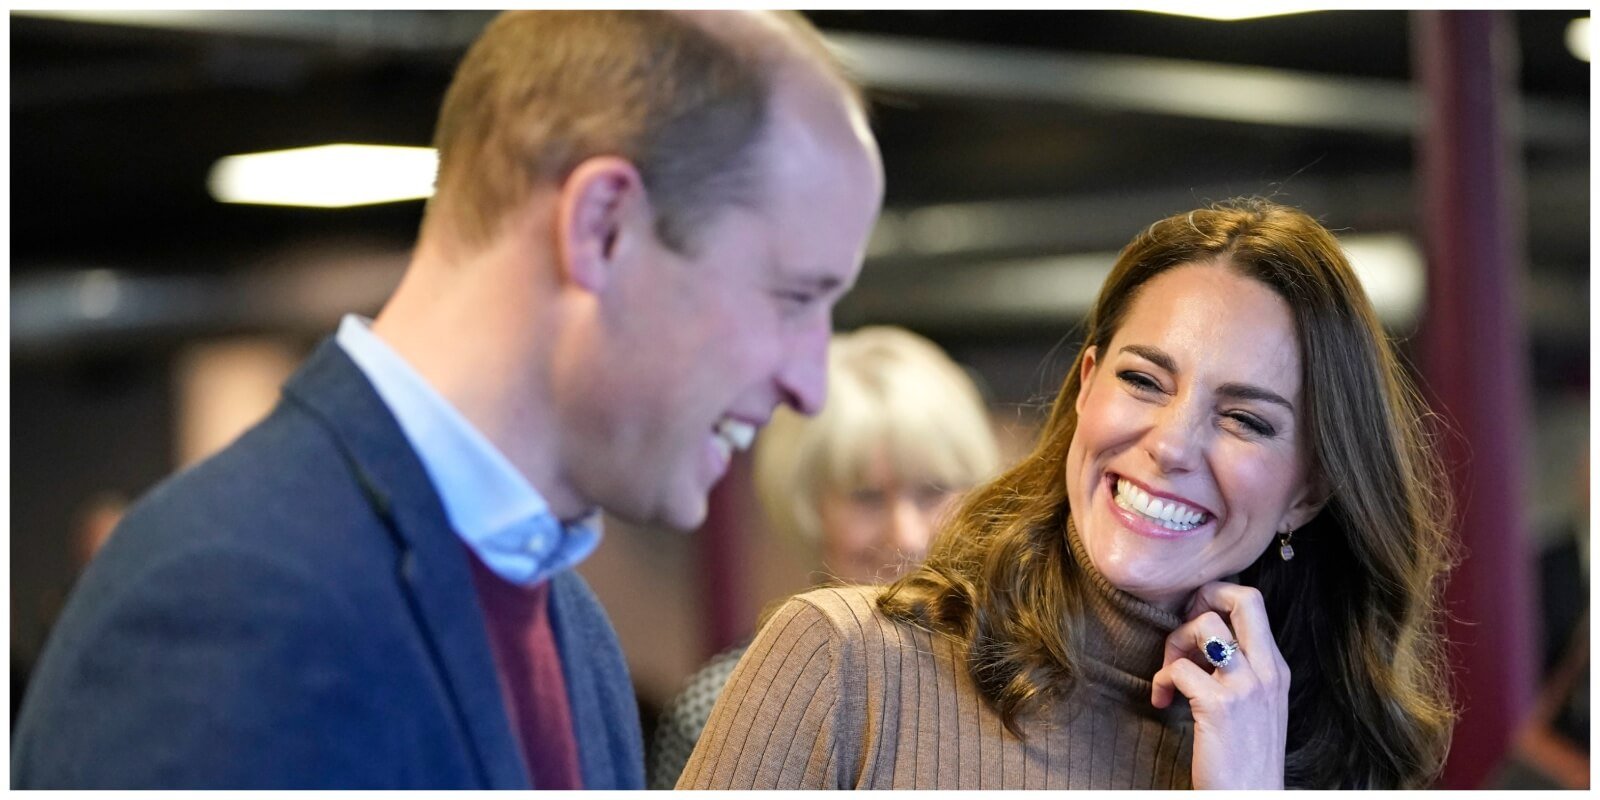 Prince William and Kate Middleton smile at a visit to the Church on the Street on January 20th, 2022 in Burnley, England.